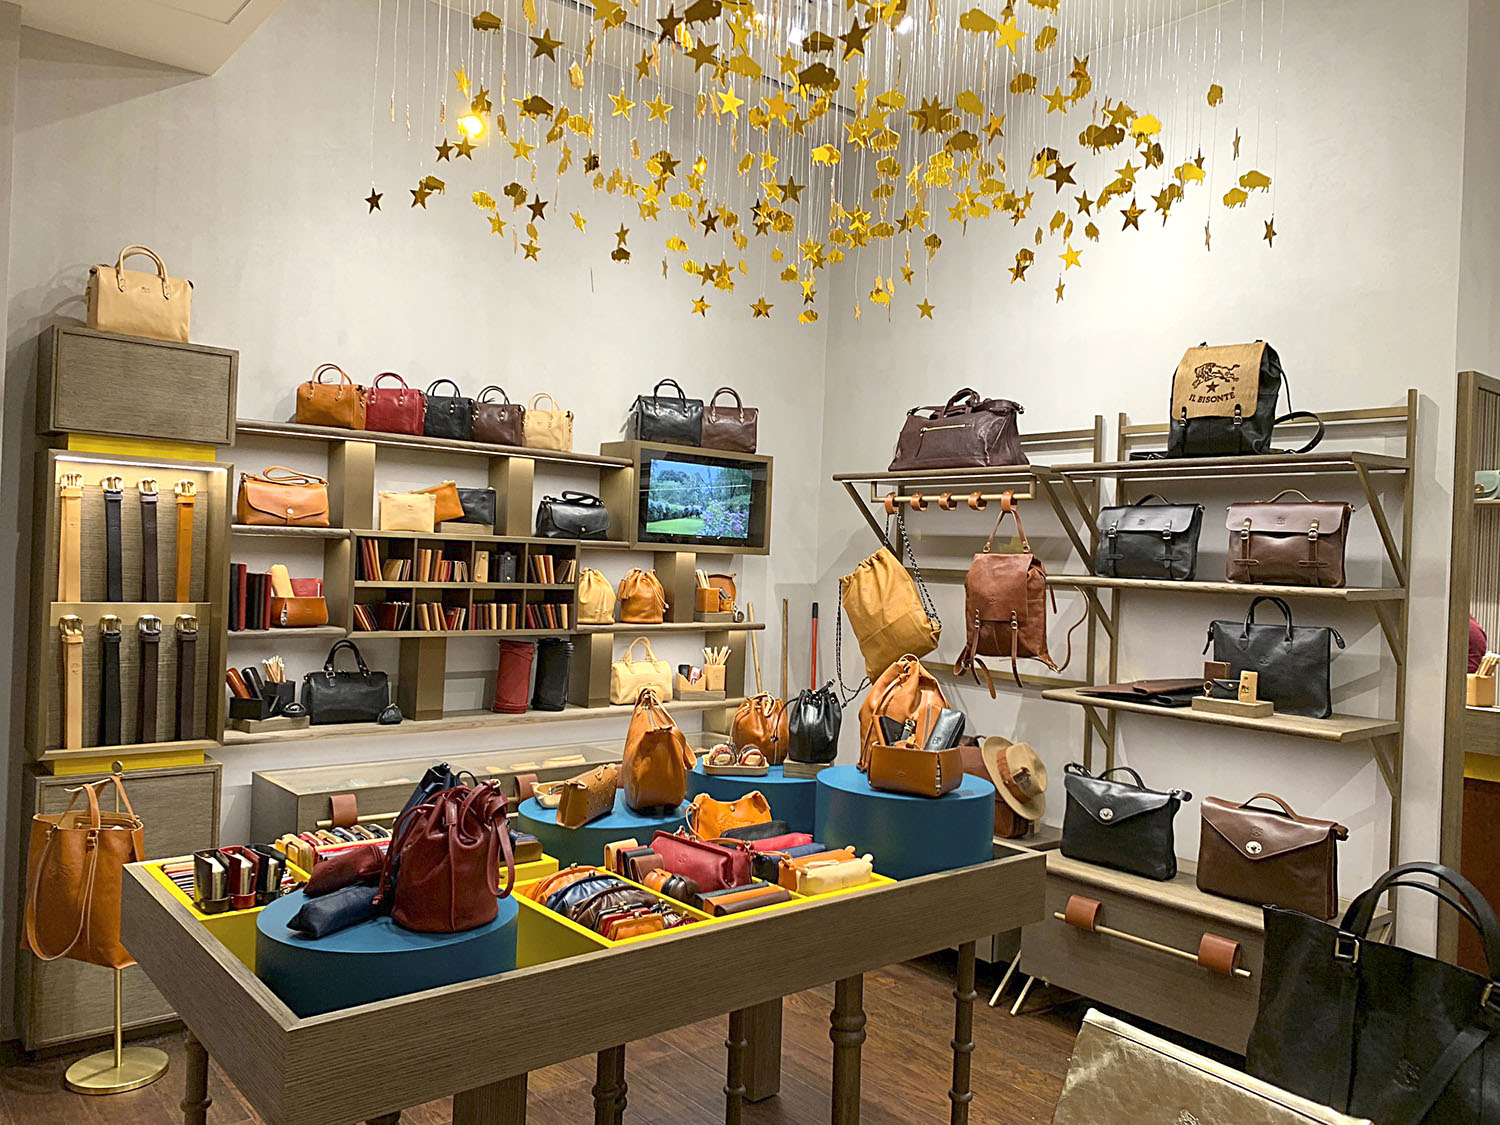 A New Store Of Il Bisonte Opens Today In Hong Kong | Il ...